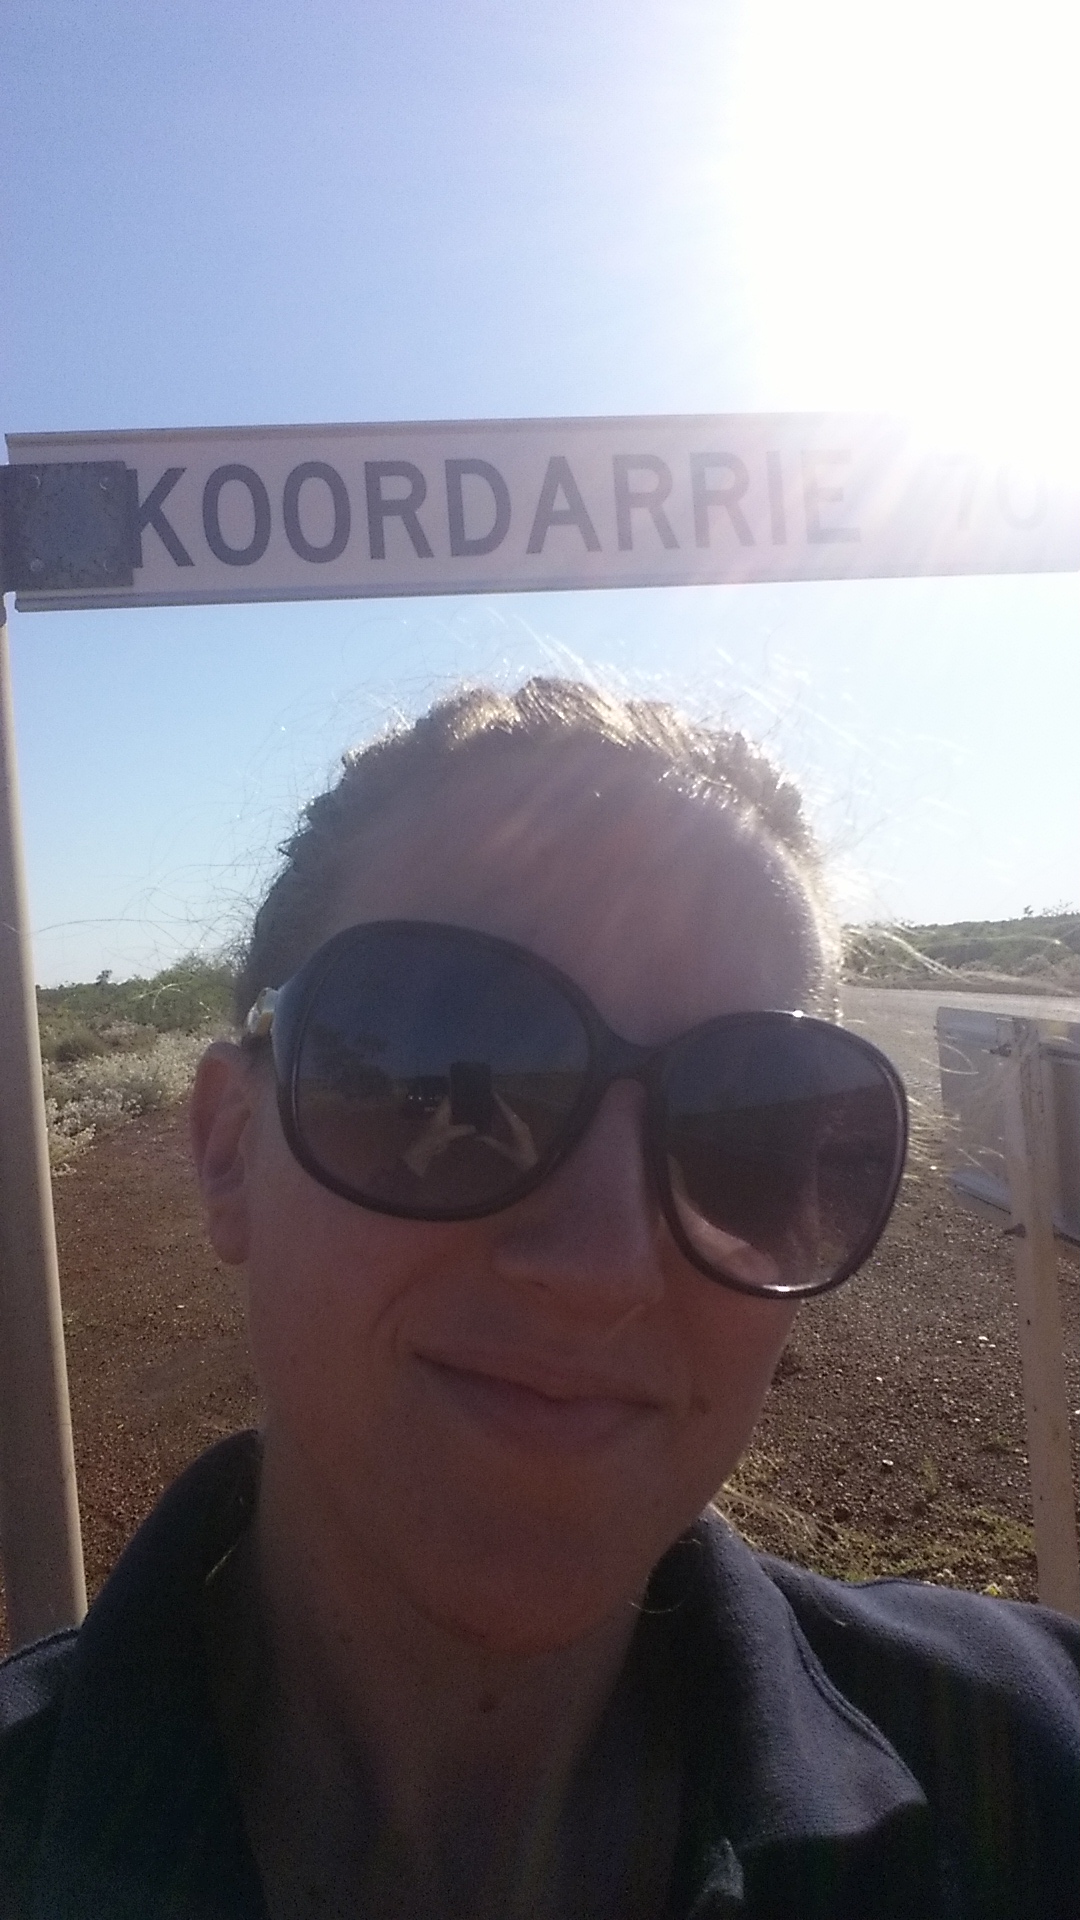 4.1. Me at the North West Coast Hwy turnoff to Koordarrie